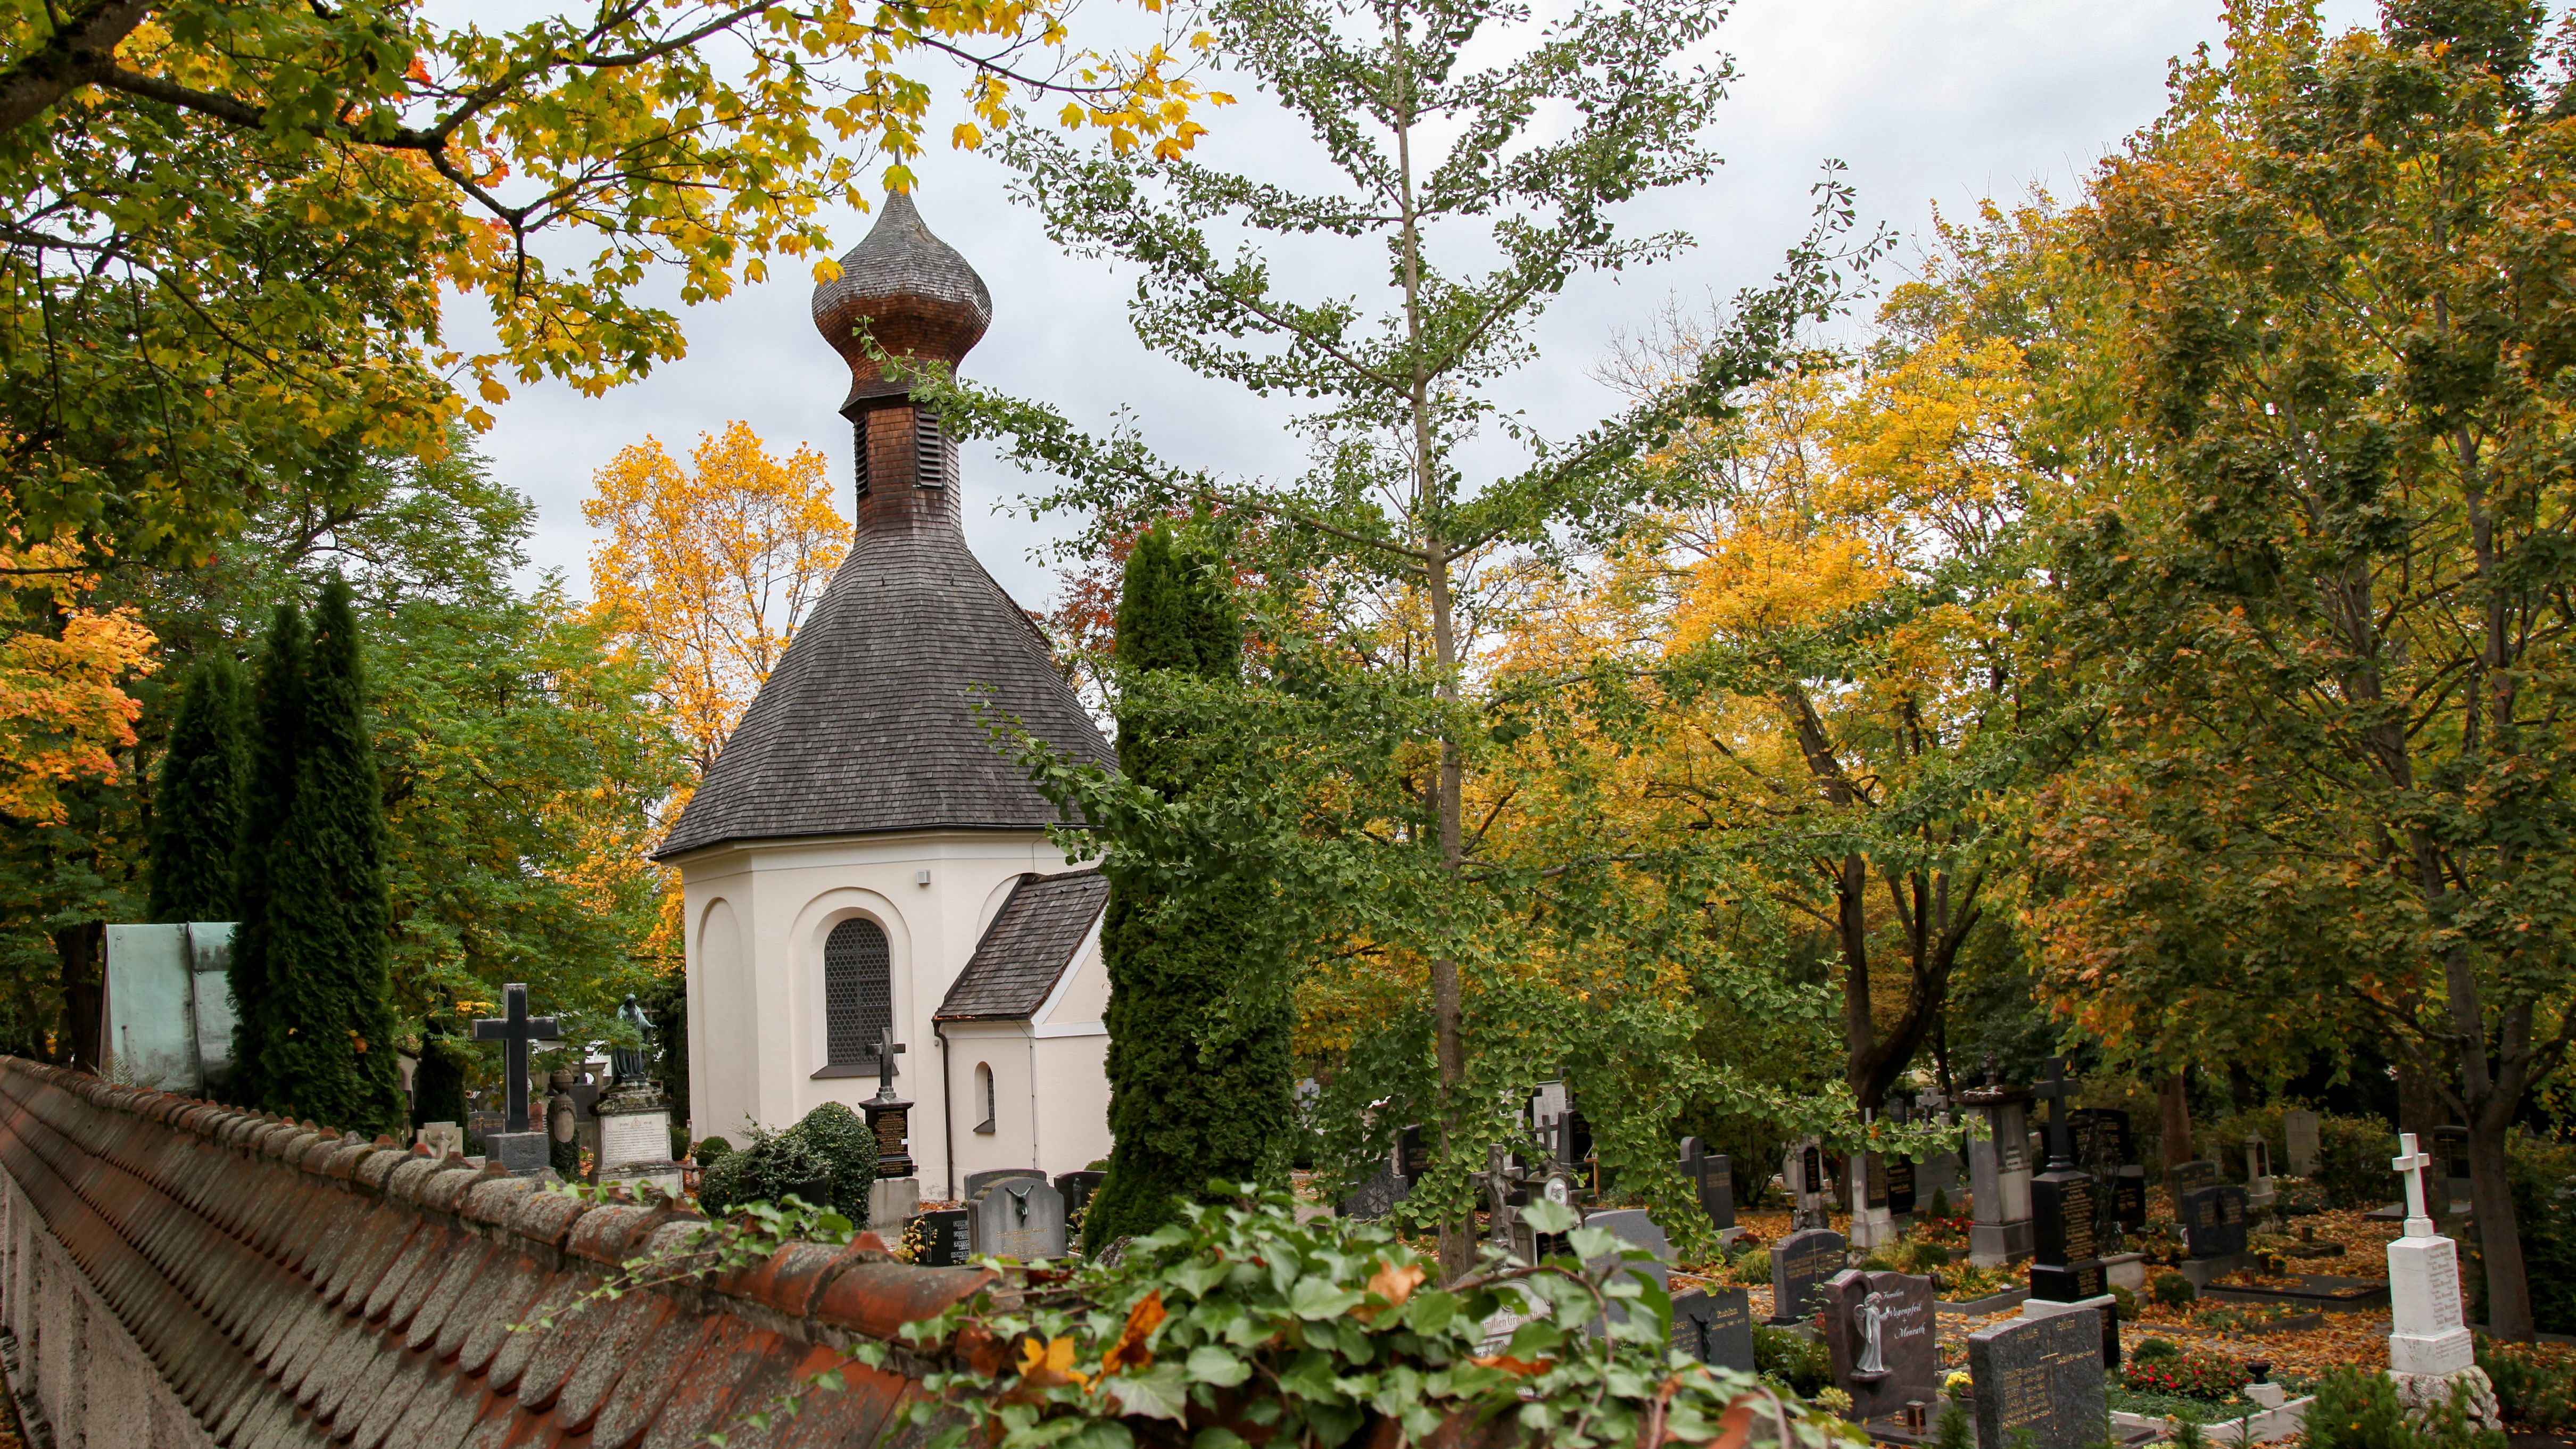 Old cemetery Dachau: Chapel and graves under big trees with fall leef colours. Photo: City of Dachau